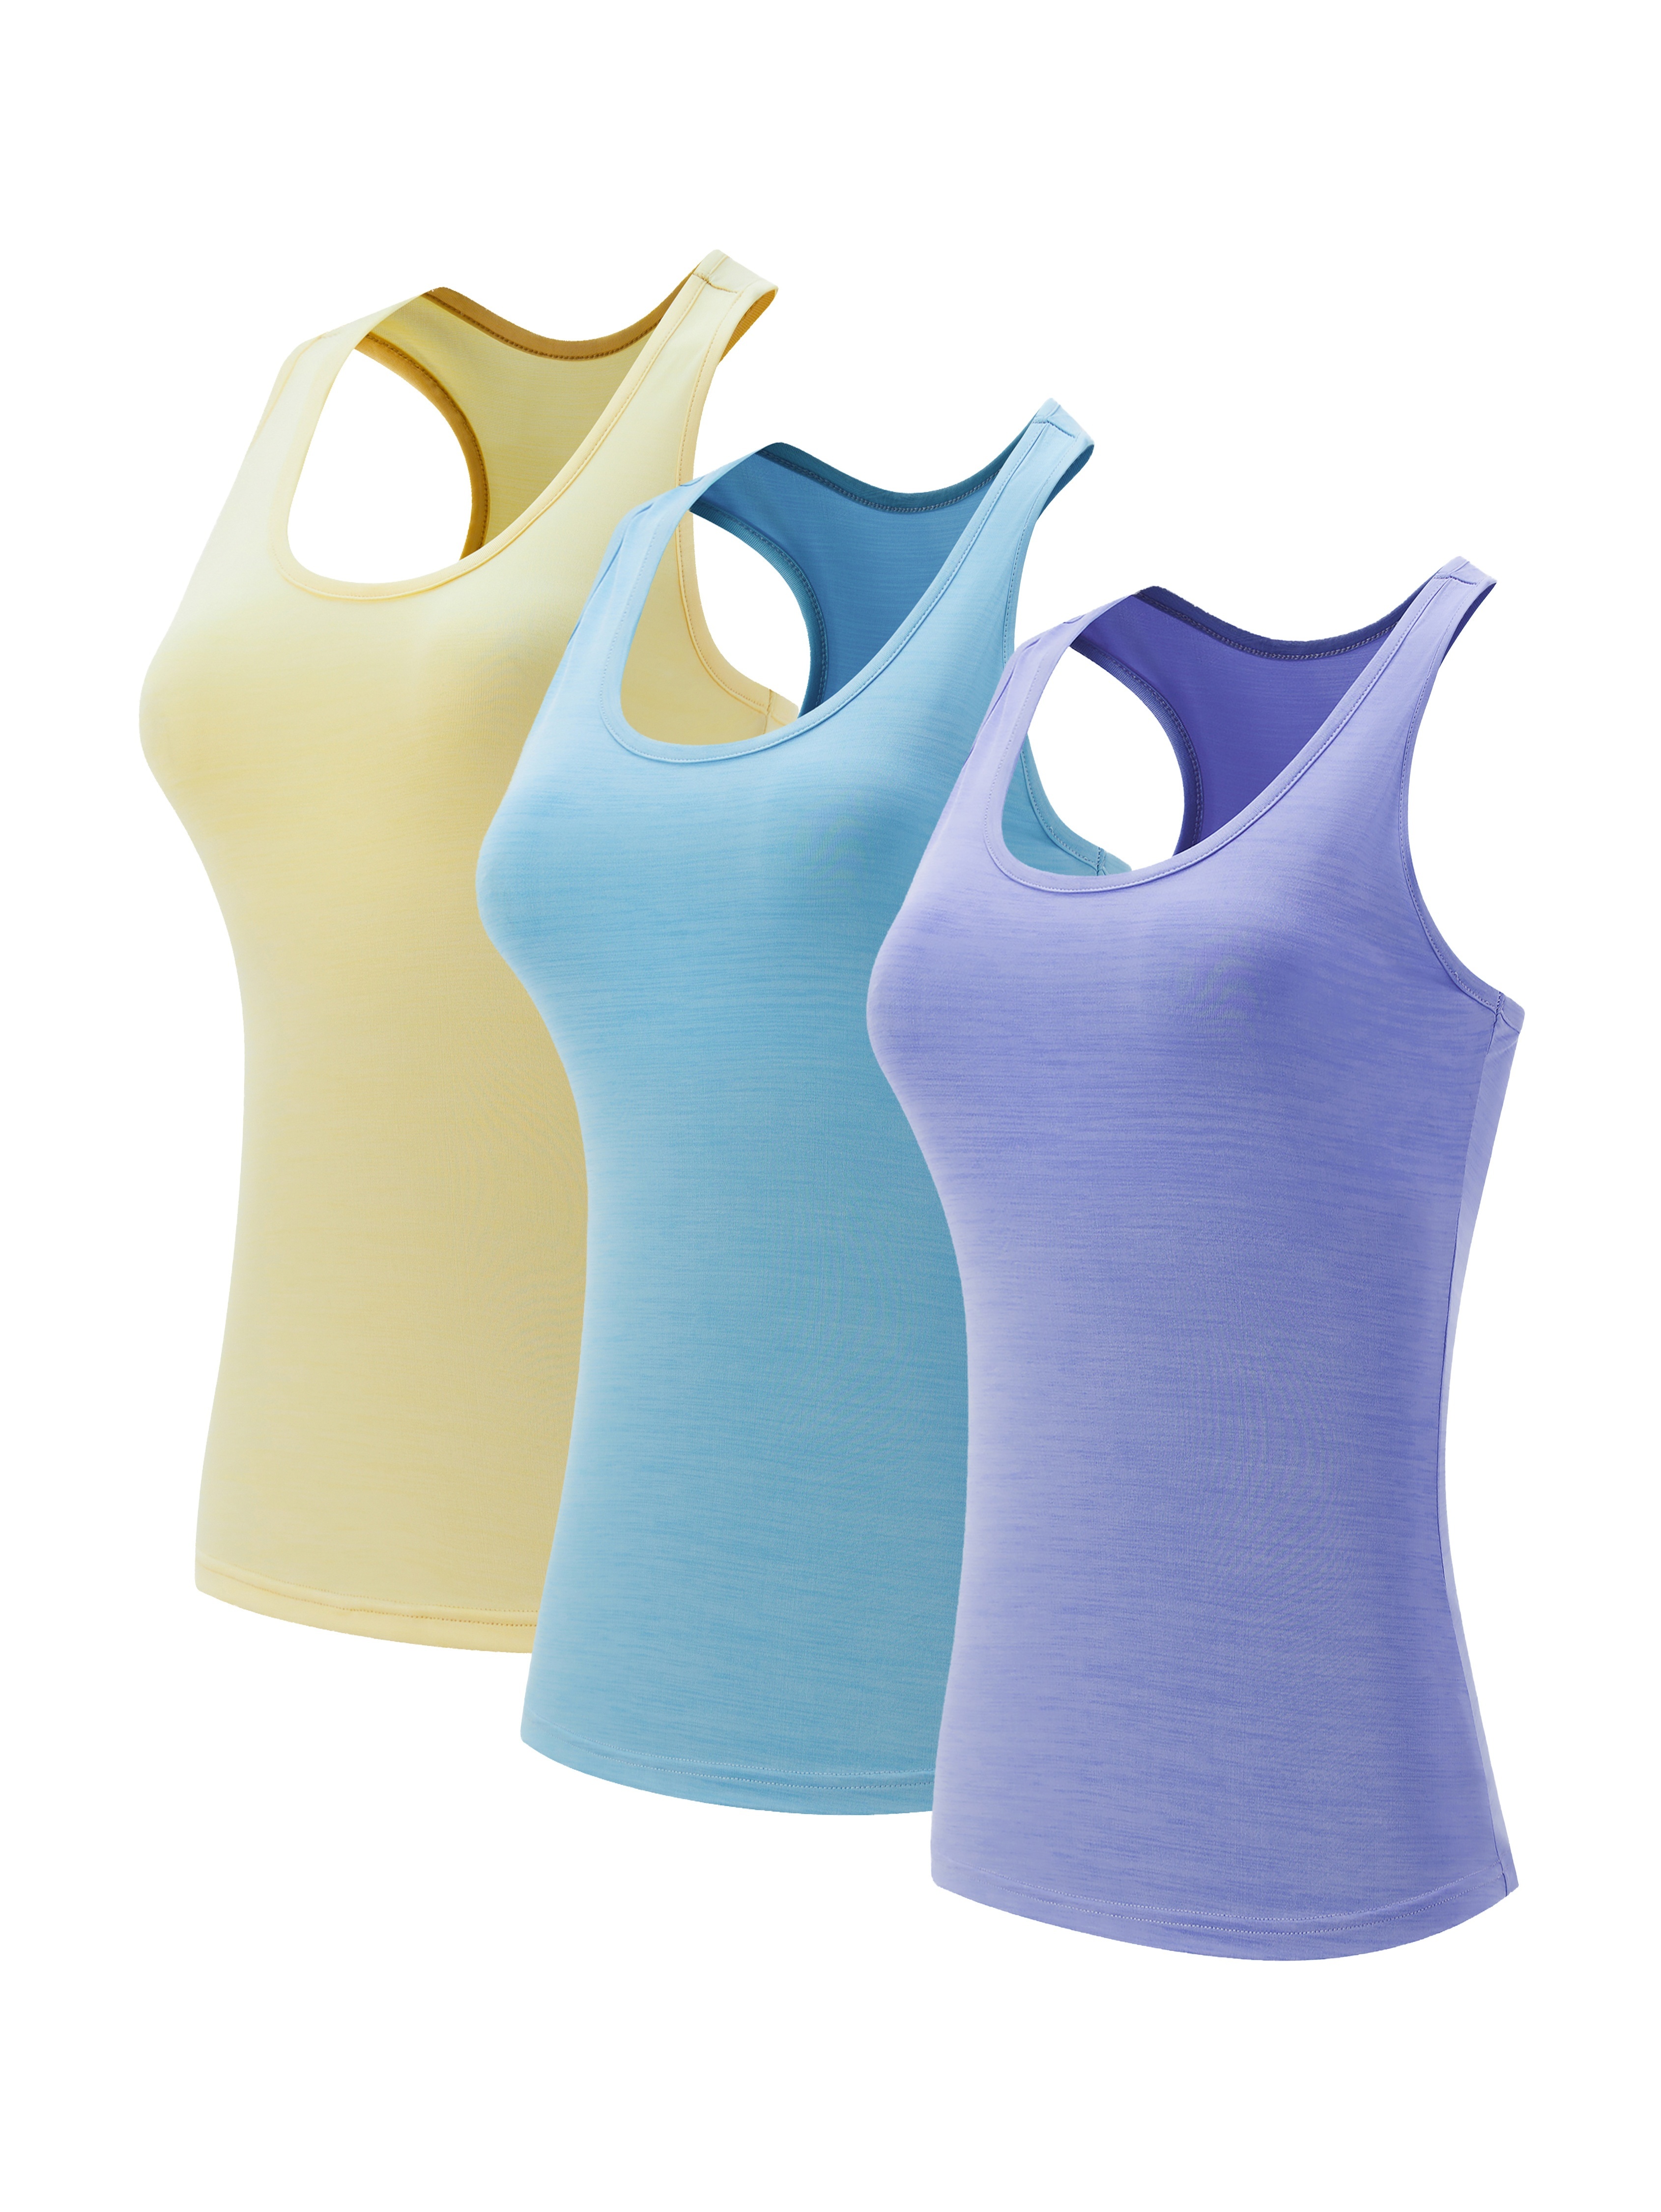 What is a racerback tank top?